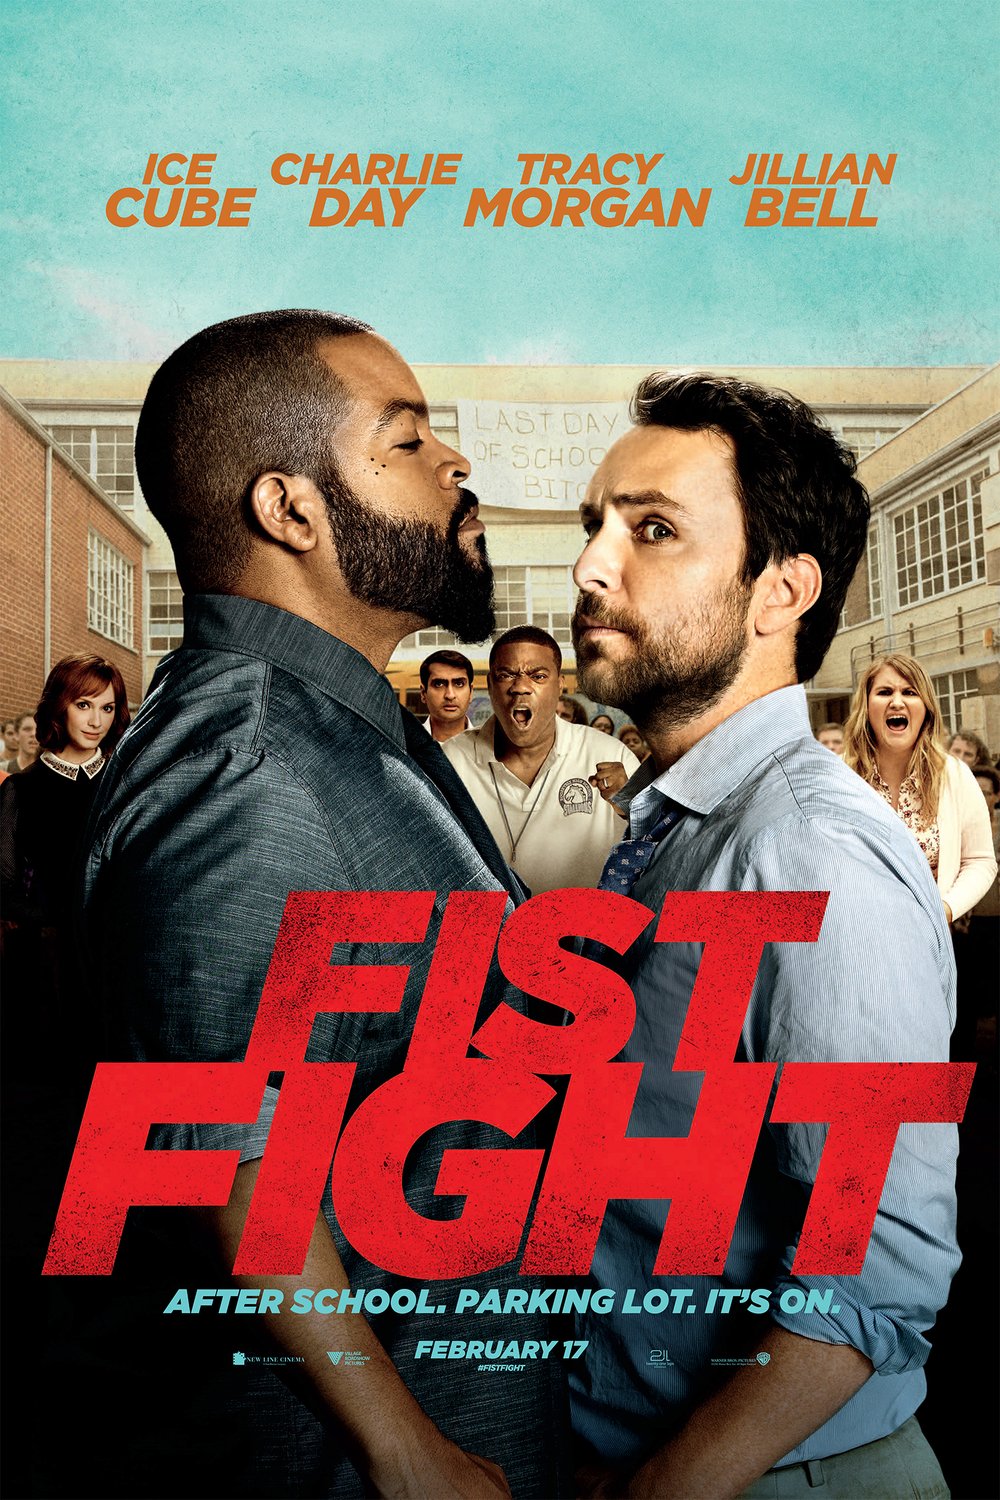 Fist Fight (2017) by Richie Keen